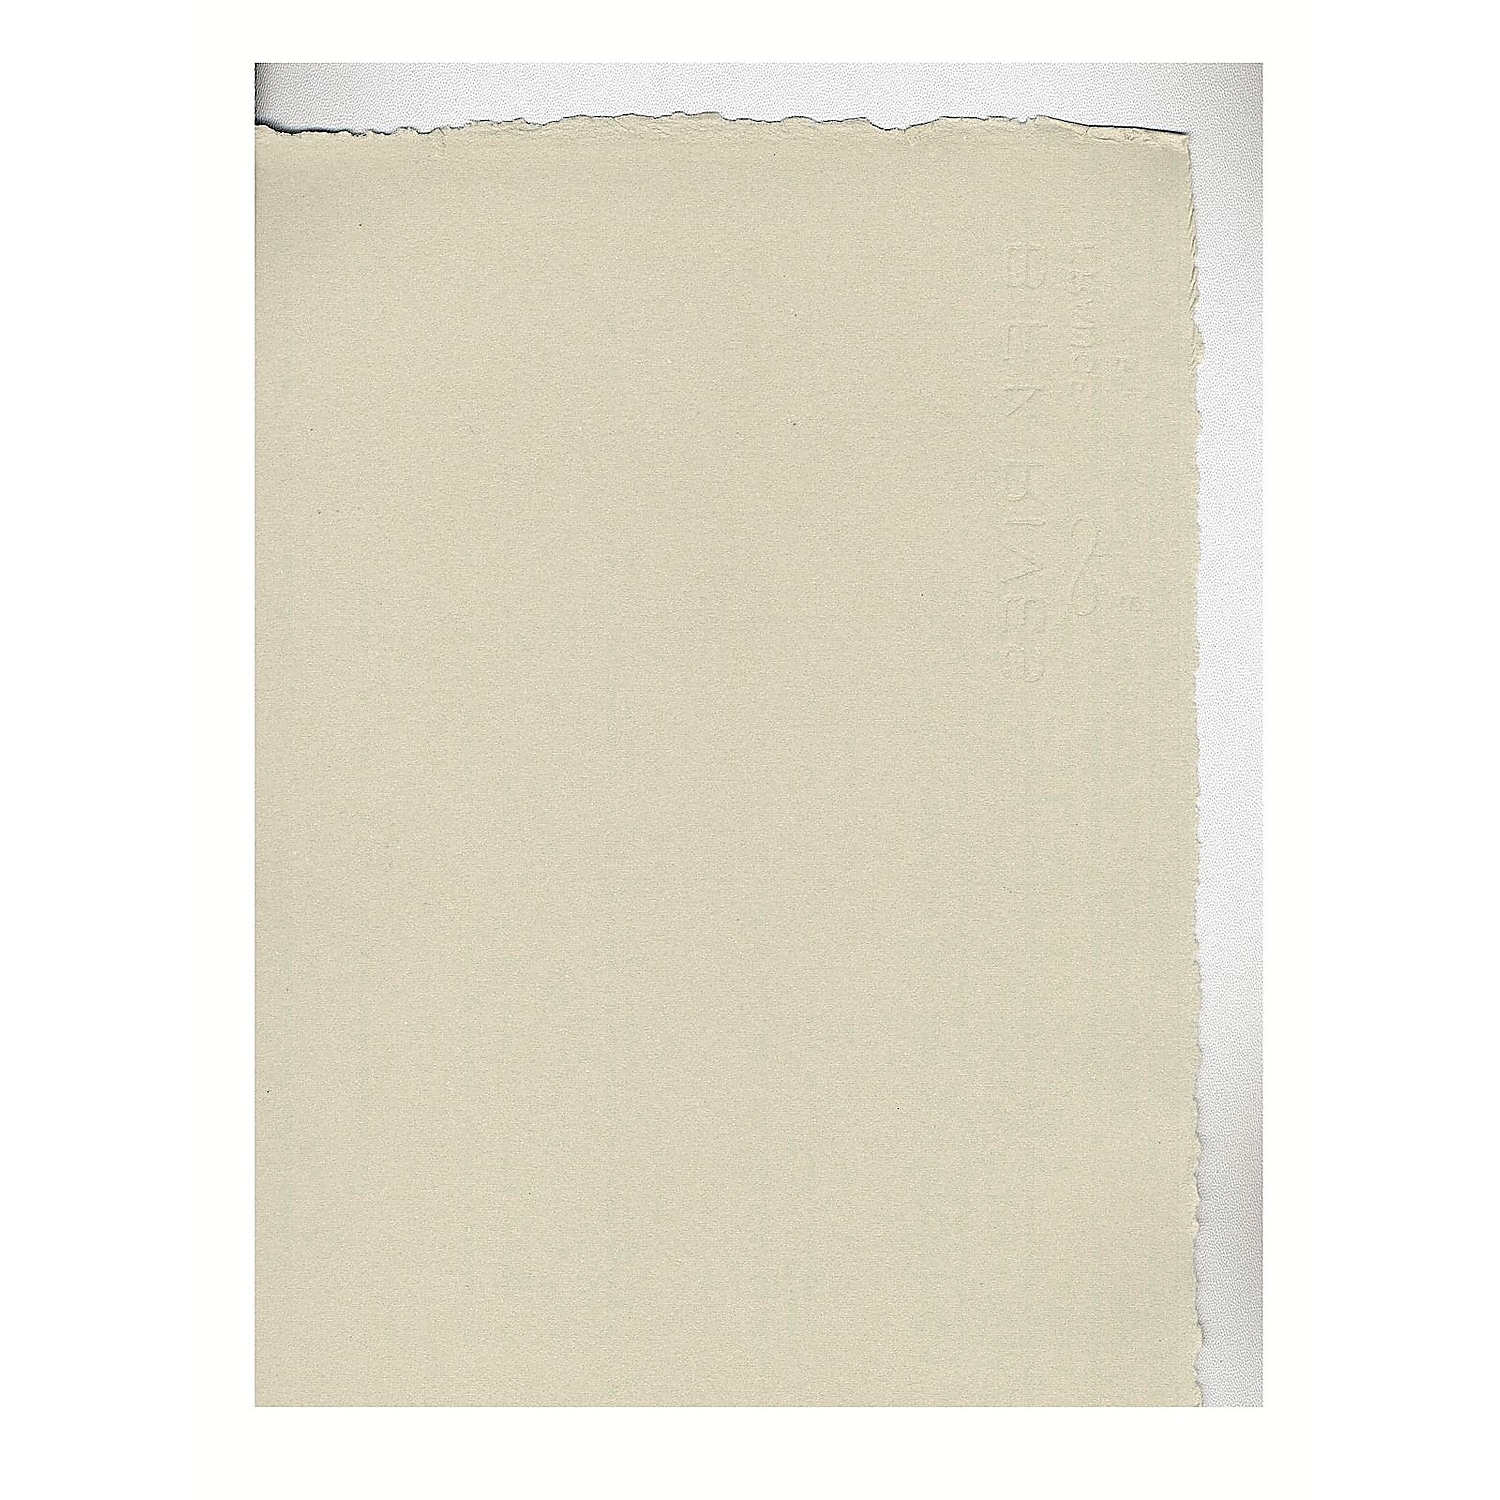 Arches Rives BFK Printmaking Paper 30 in. x 44 in. Sheet Gray 280 GM (204281519) 51996